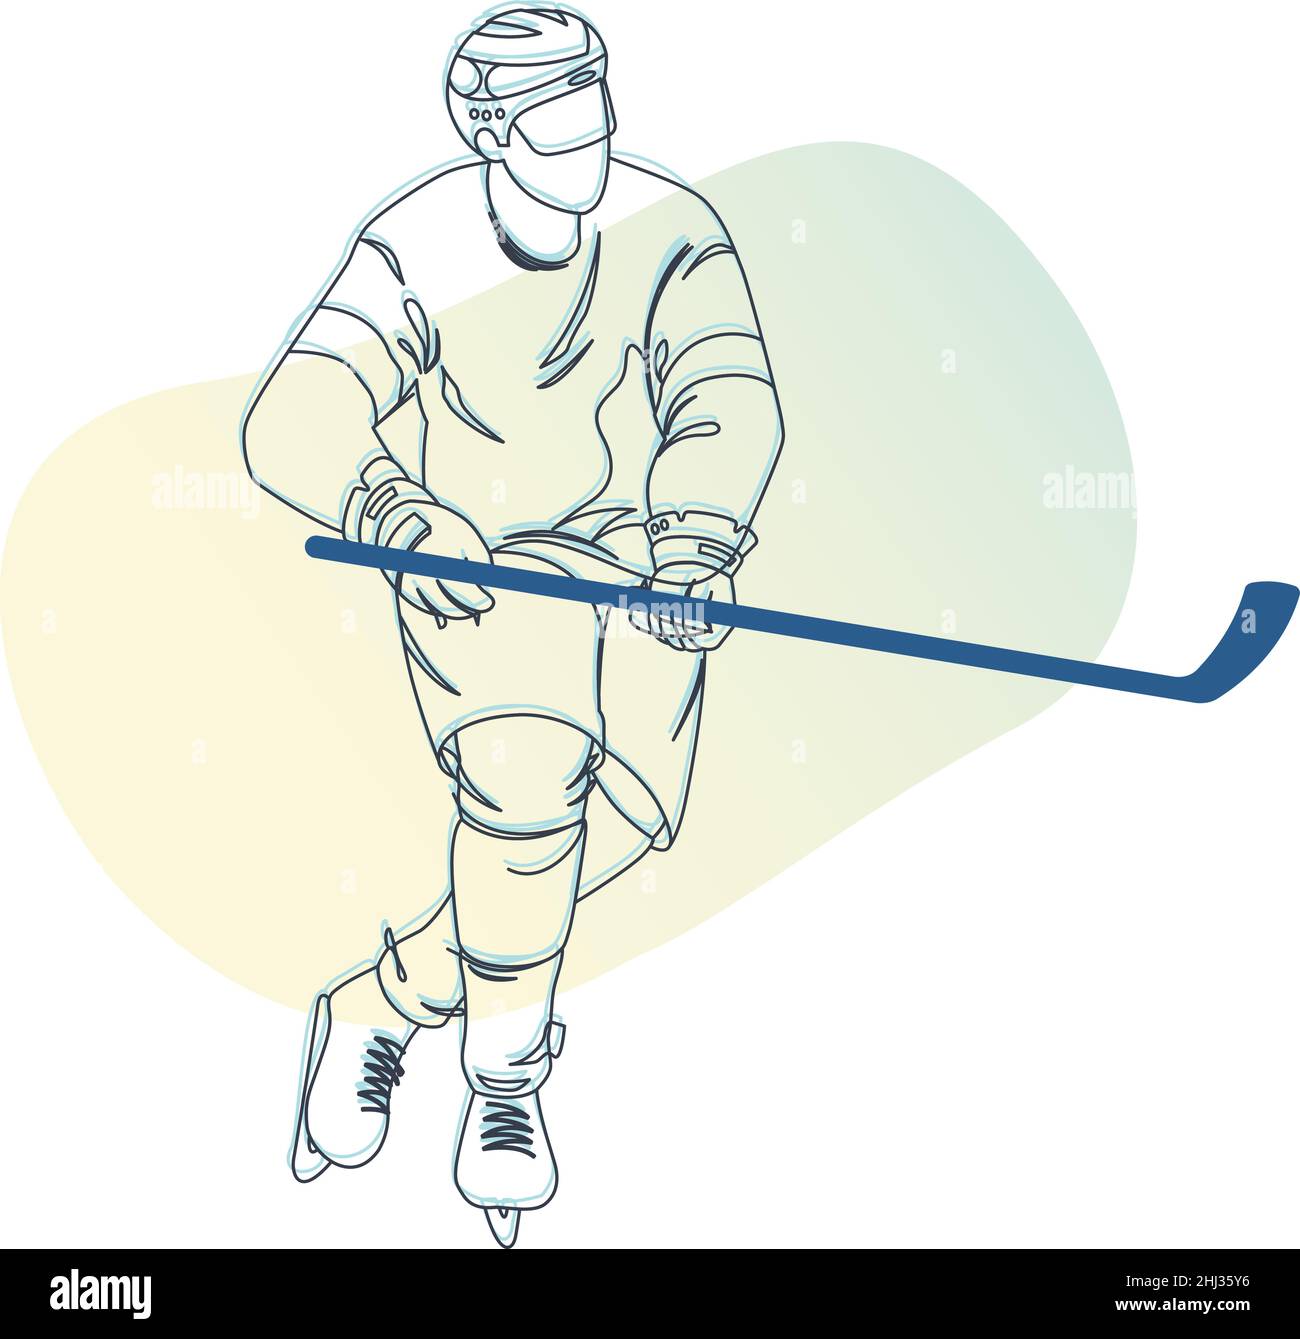 2,232 We Love Hockey Images, Stock Photos, 3D objects, & Vectors